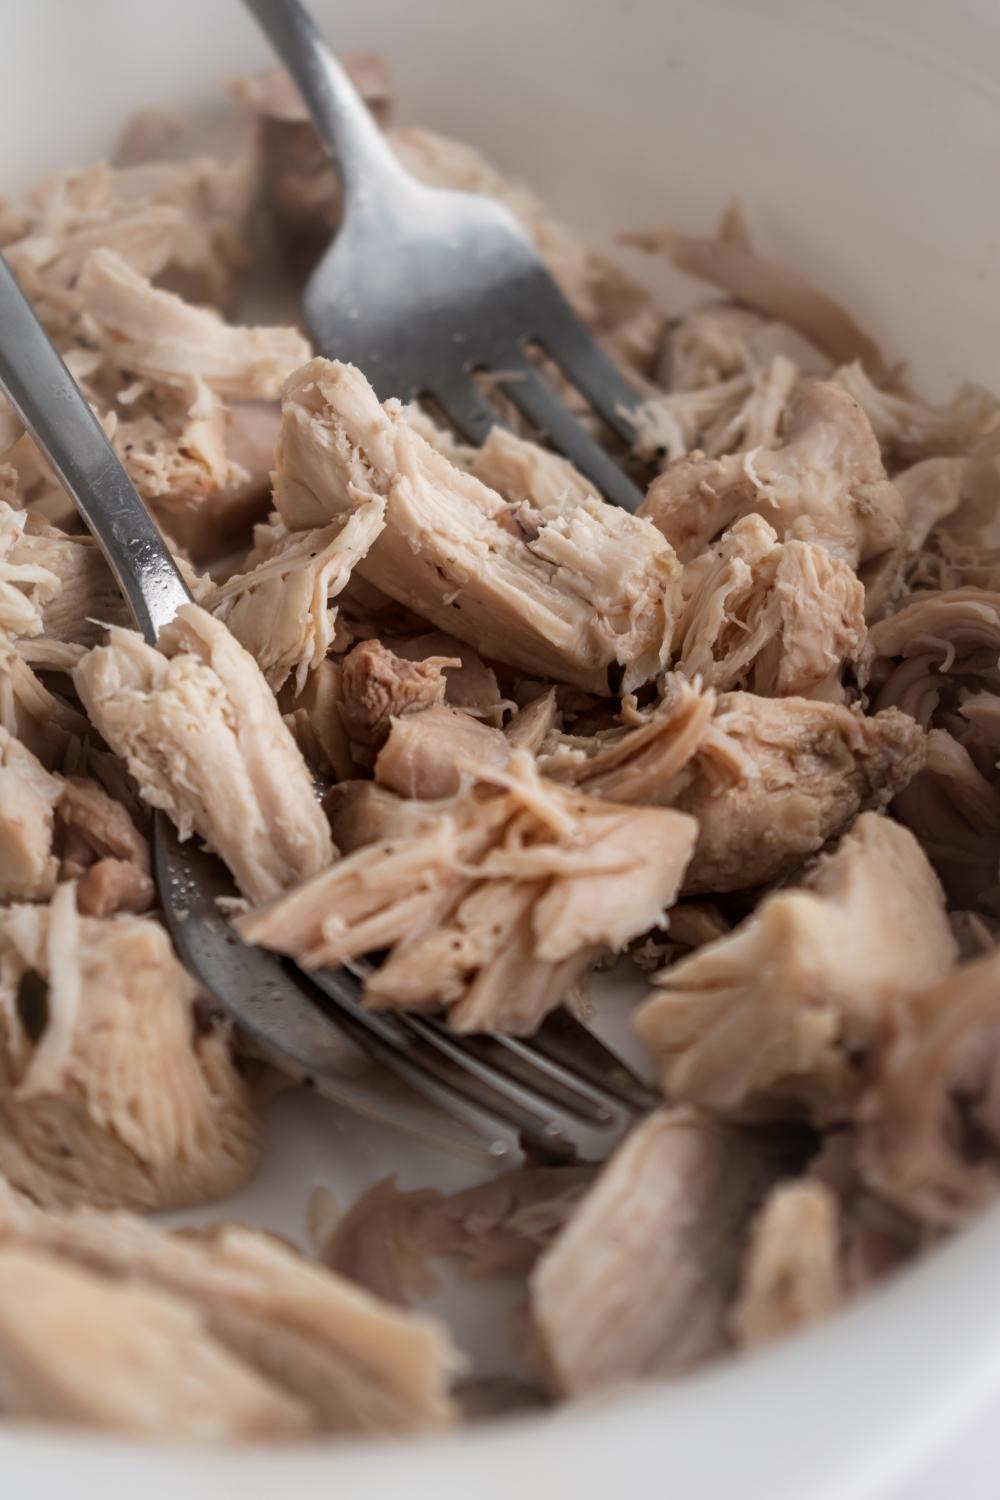 Shredded chicken in a white bowl with two forks.